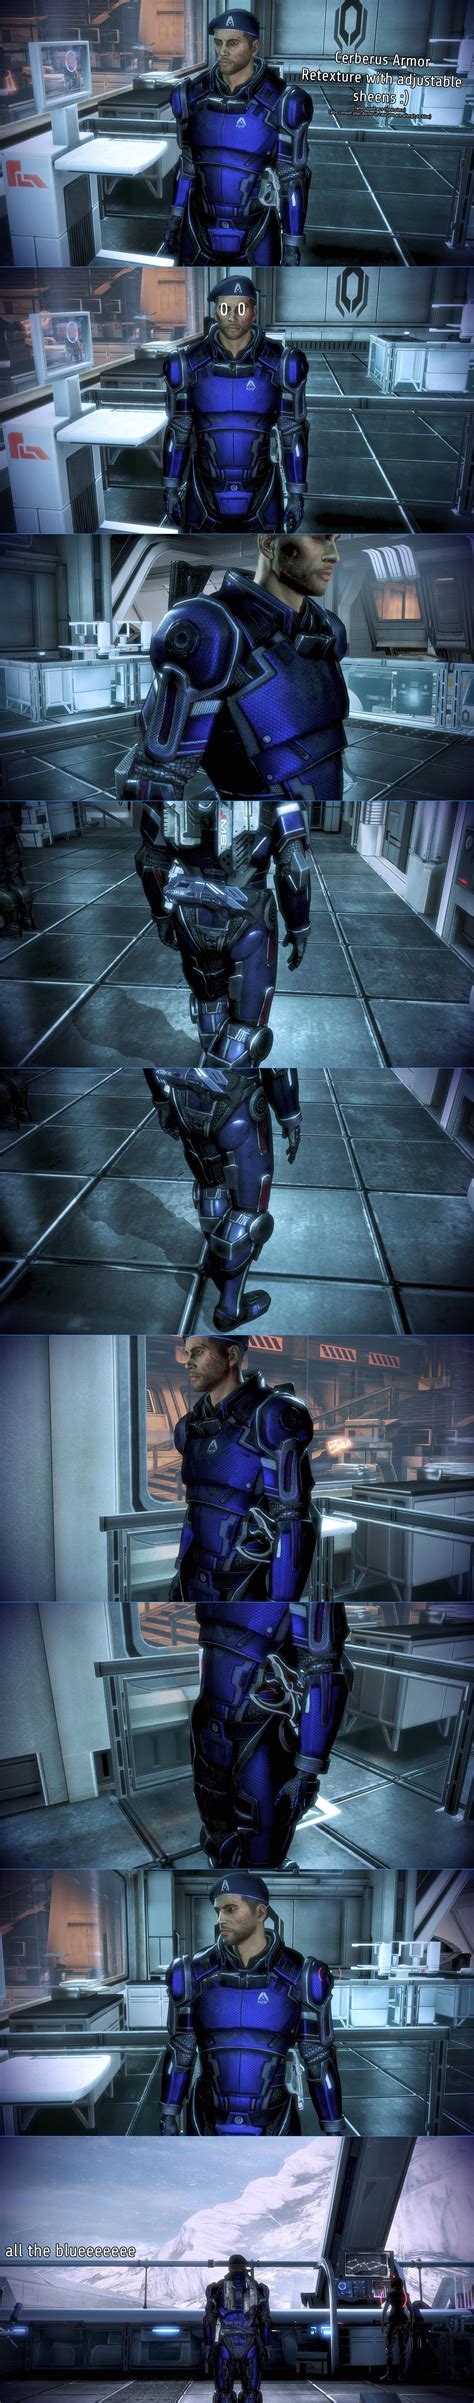 Mass Effect 3 Texmod Cerberus Armor By Droot1986 On Deviantart